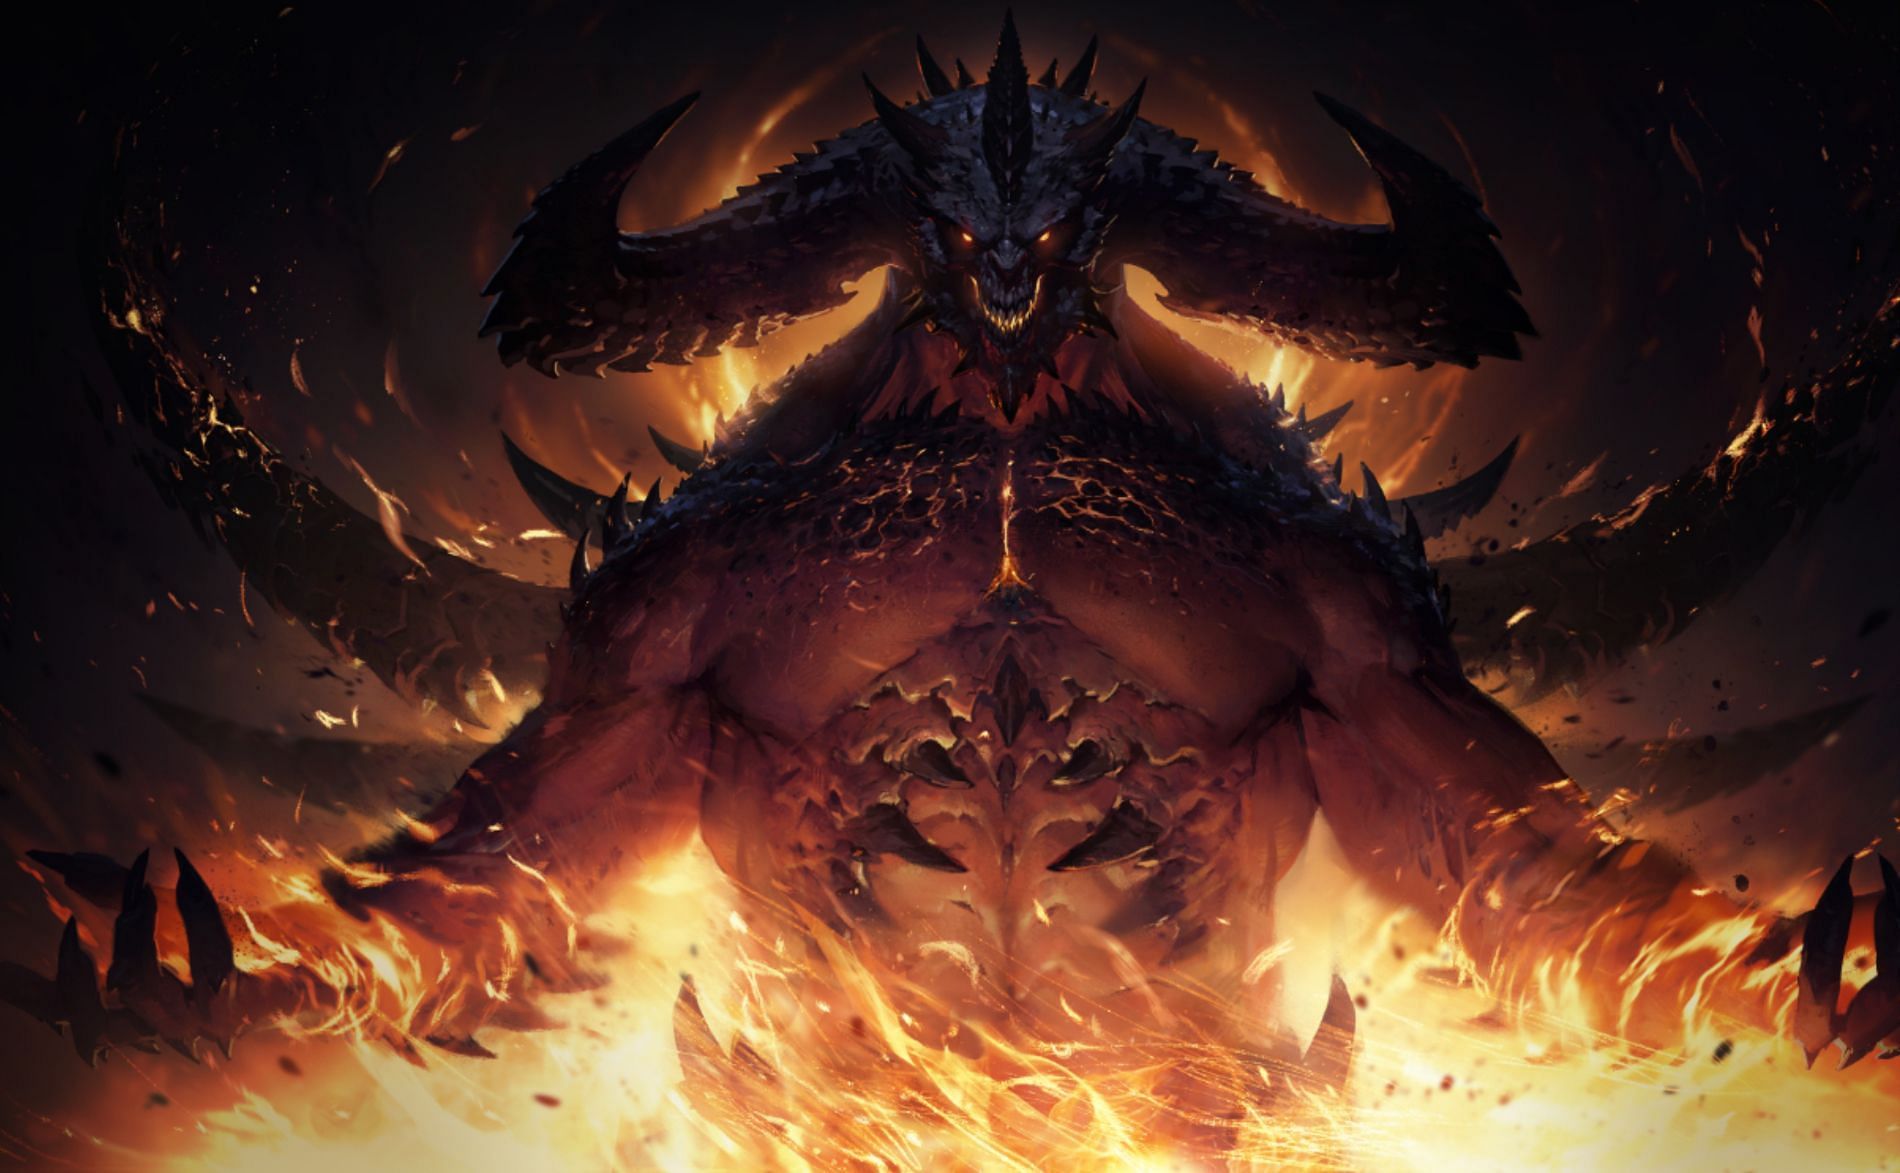 Diablo Immortal will not be sold in Belgium or the Netherlands due to laws regarding lootboxes (Image via Activision Blizzard)